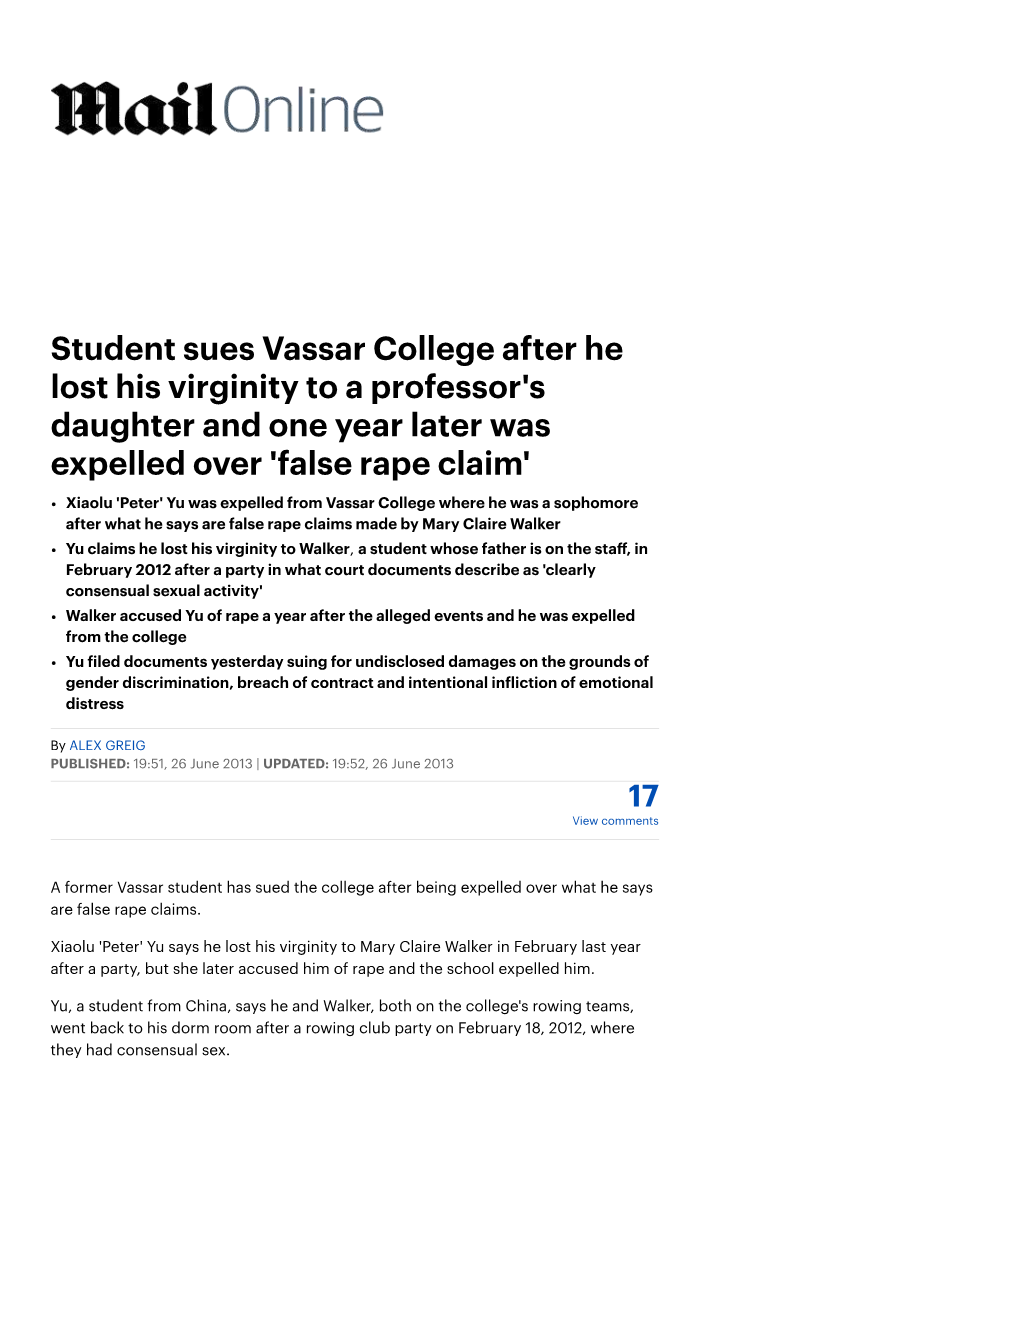 Student Sues Vassar College After He Lost His Virginity to a Professor's